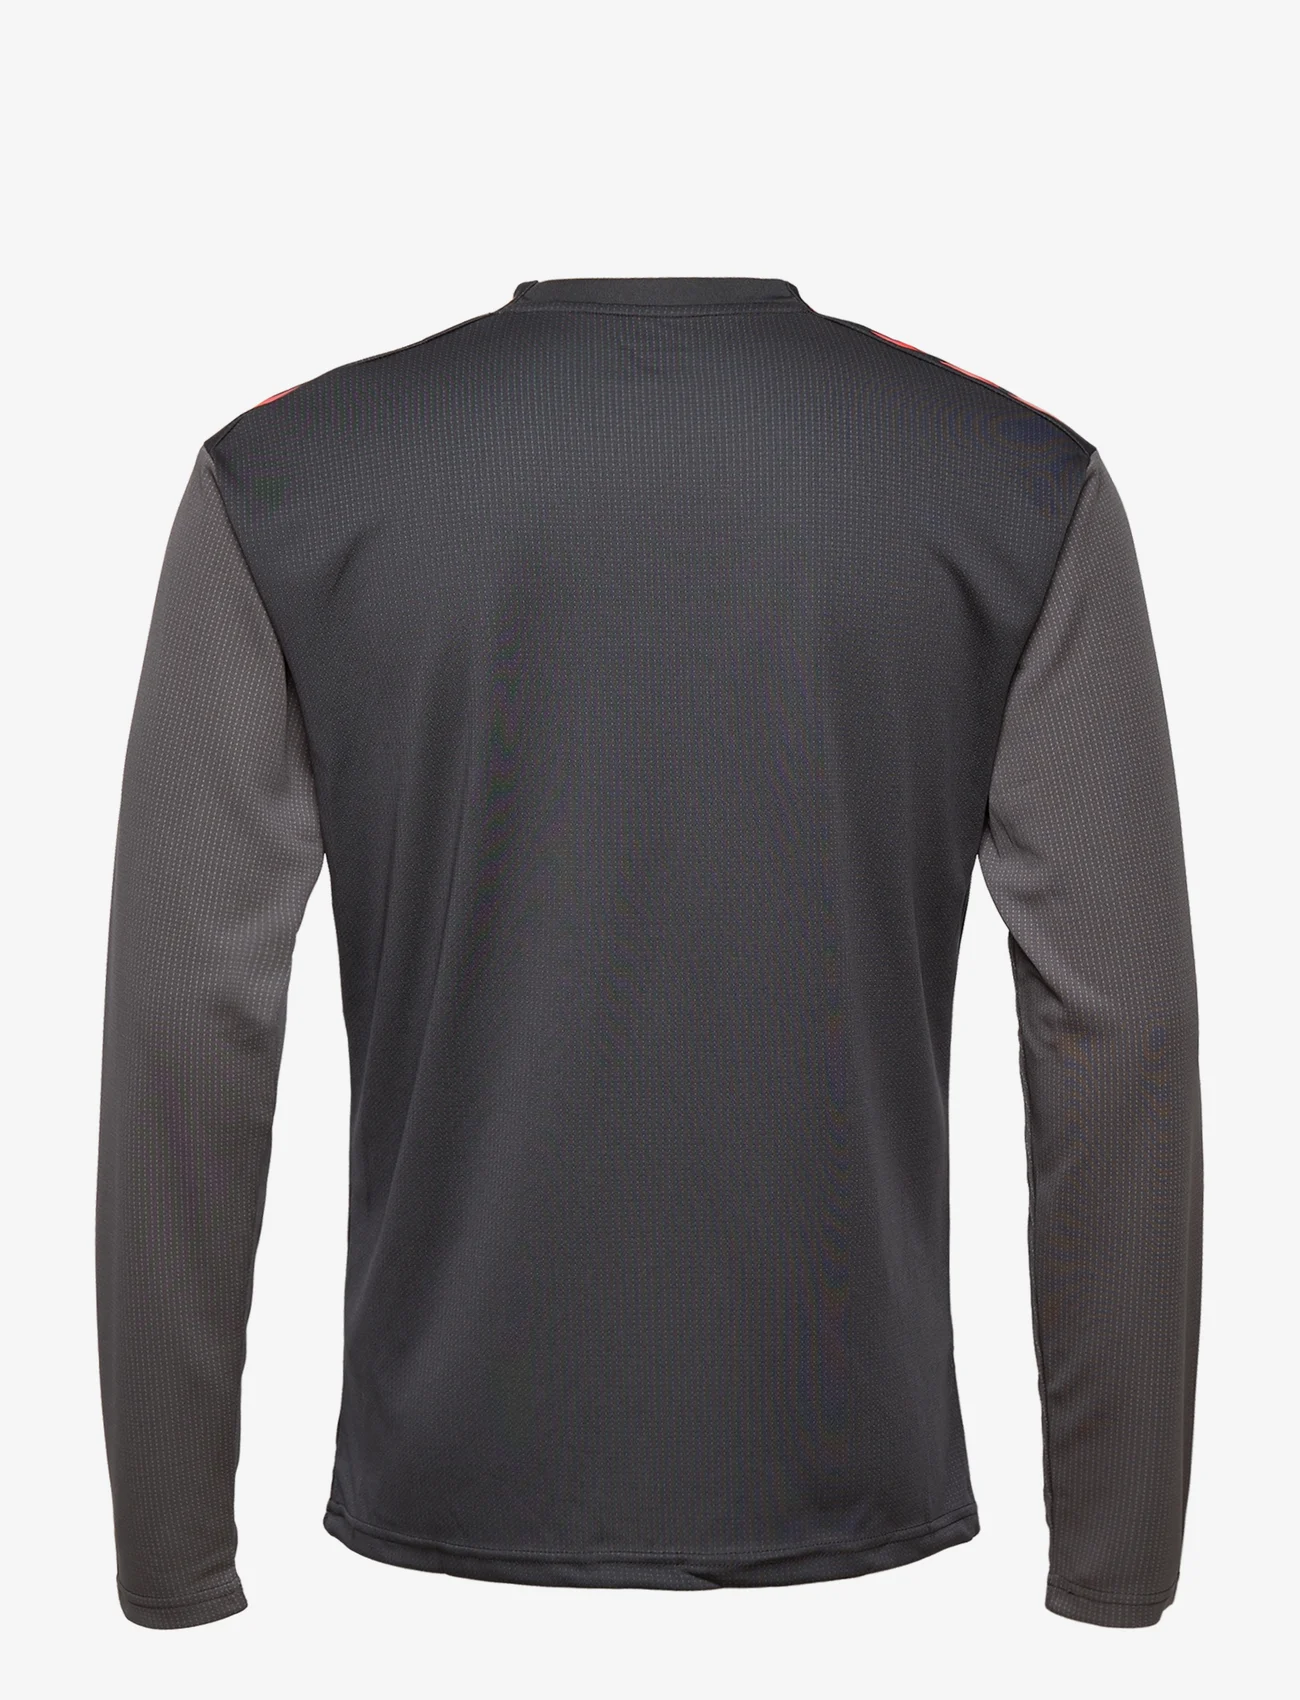 Hummel - hmlPRO GRID GAME JERSEY L/S - longsleeved tops - forged iron/quiet shade - 1